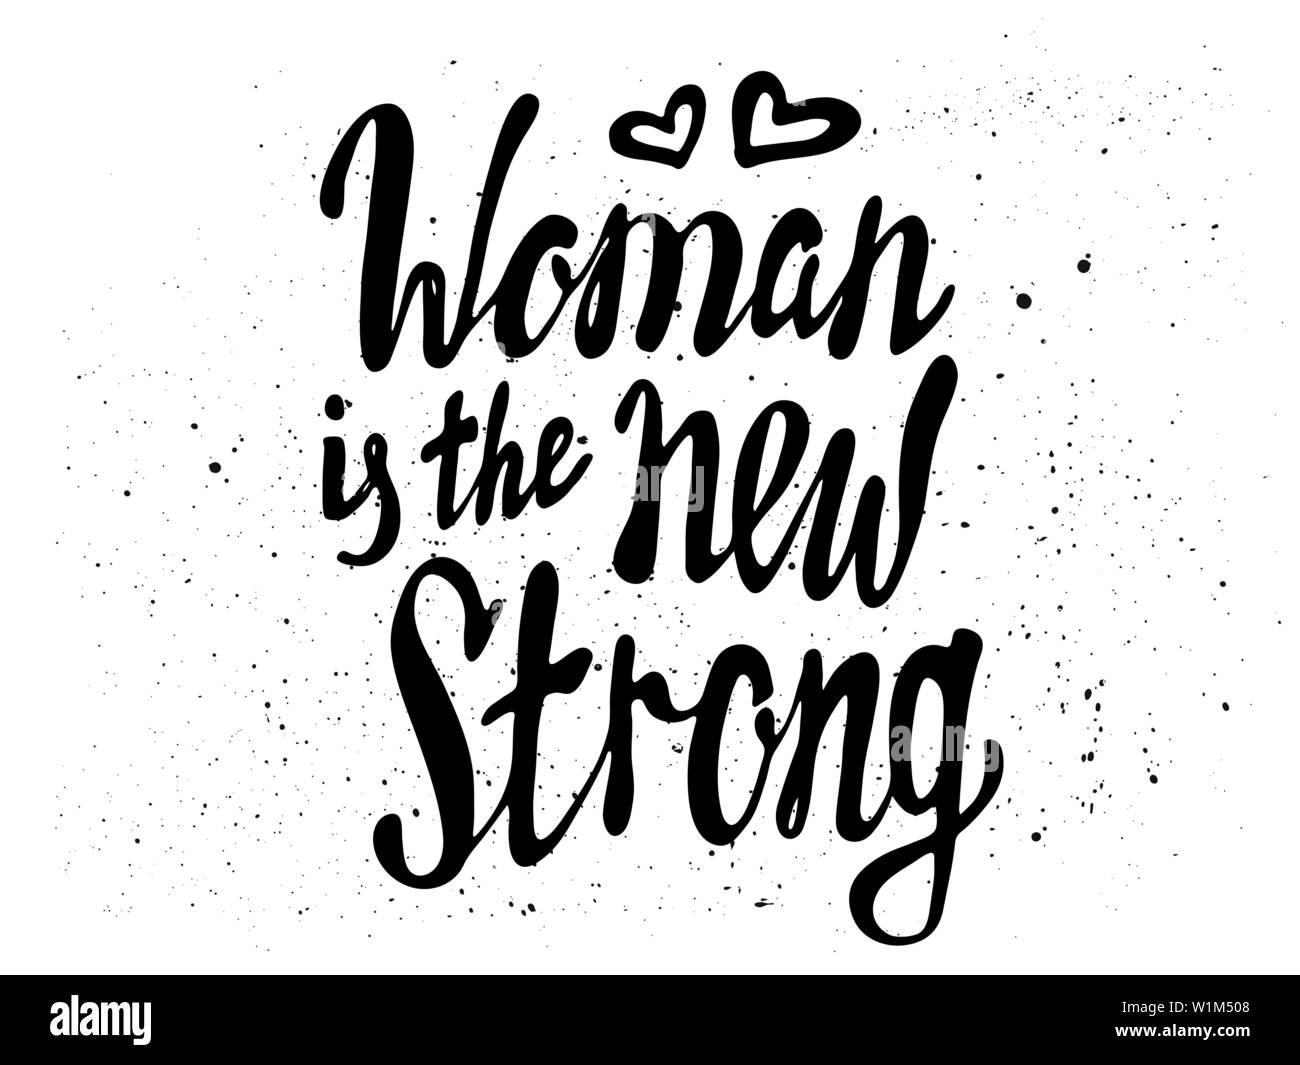 Girl power black and white quote. Grl pwr, feminism lettering. Womens right. Female symbols. Vector hand drawn illustration. Can be used as print for poster, t shirt, postcard. Stock Vector